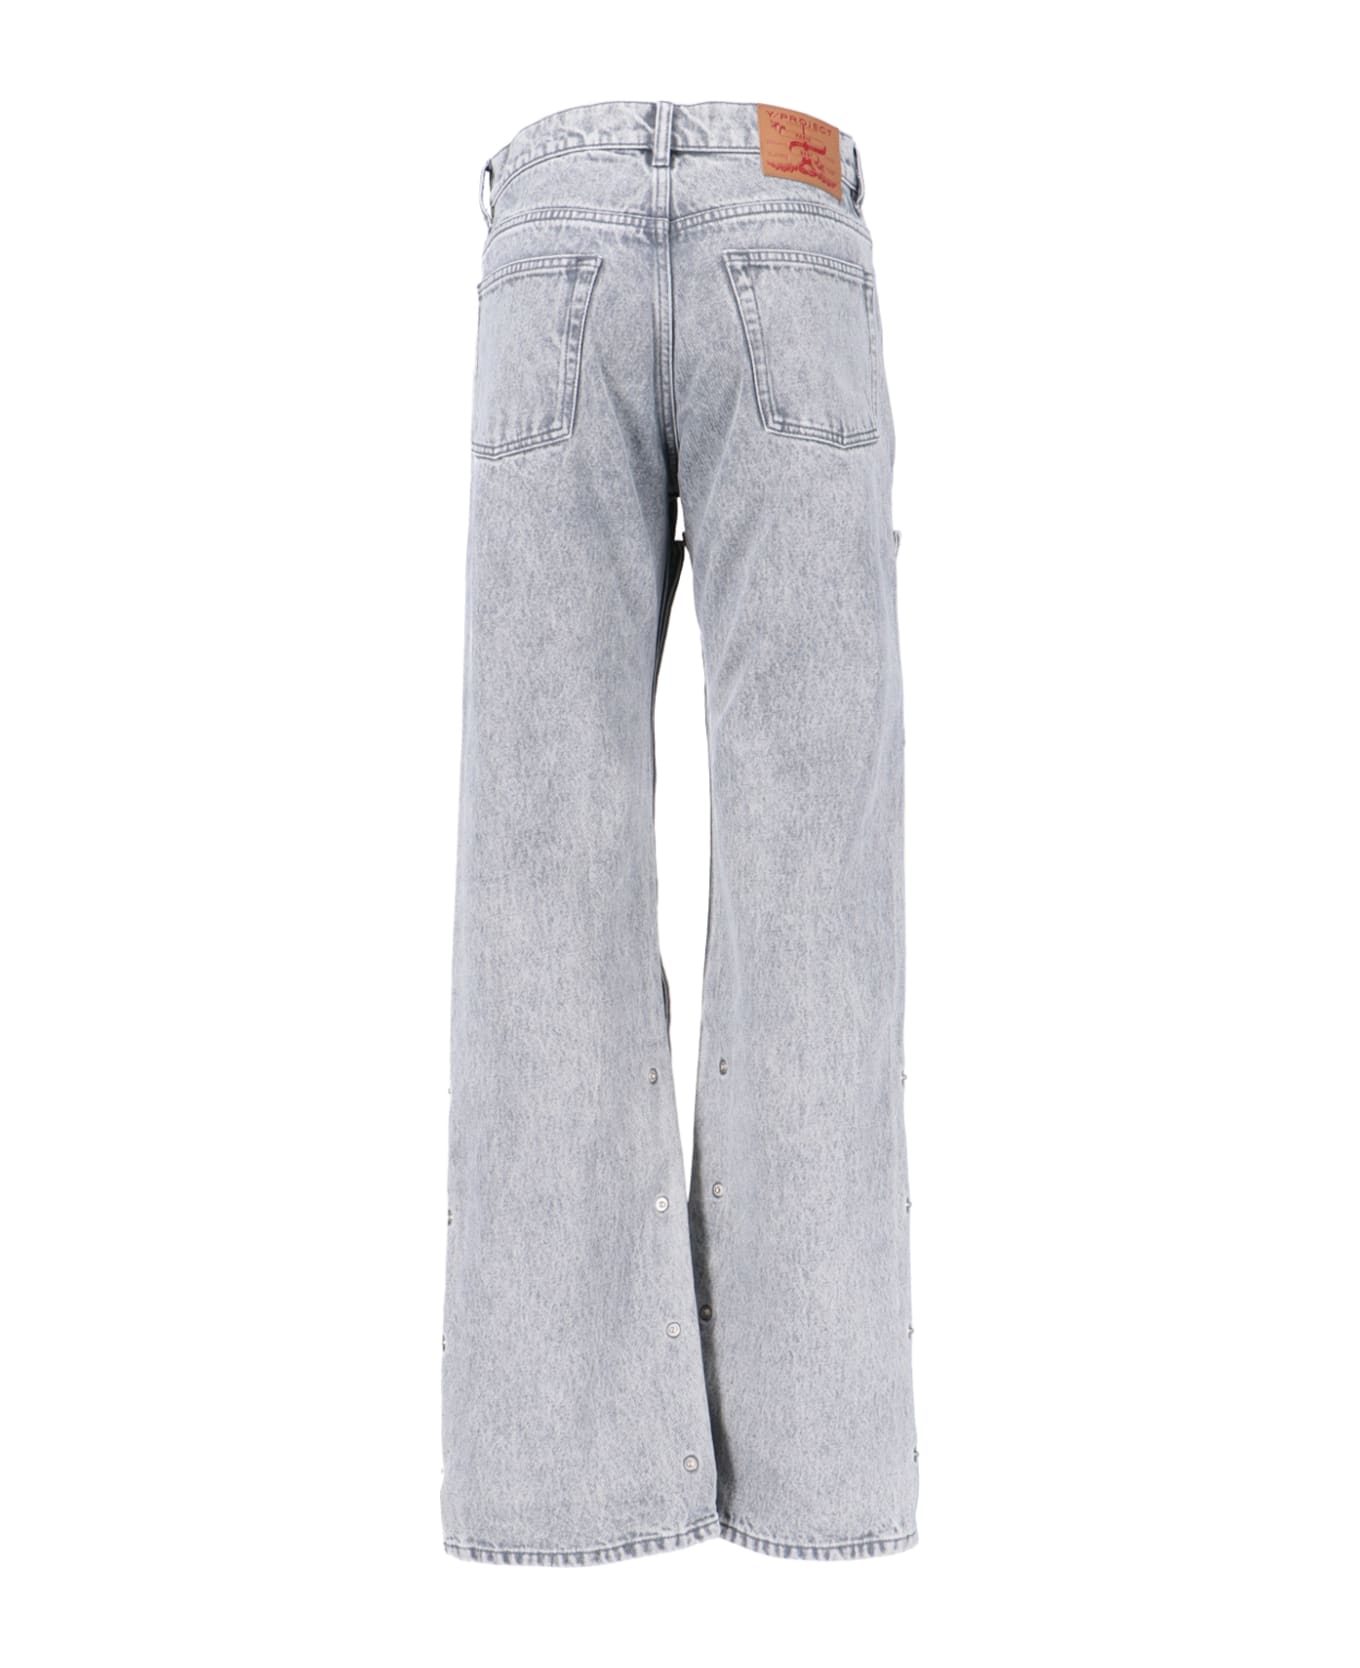 Y/Project Vintage Jeans - Gray